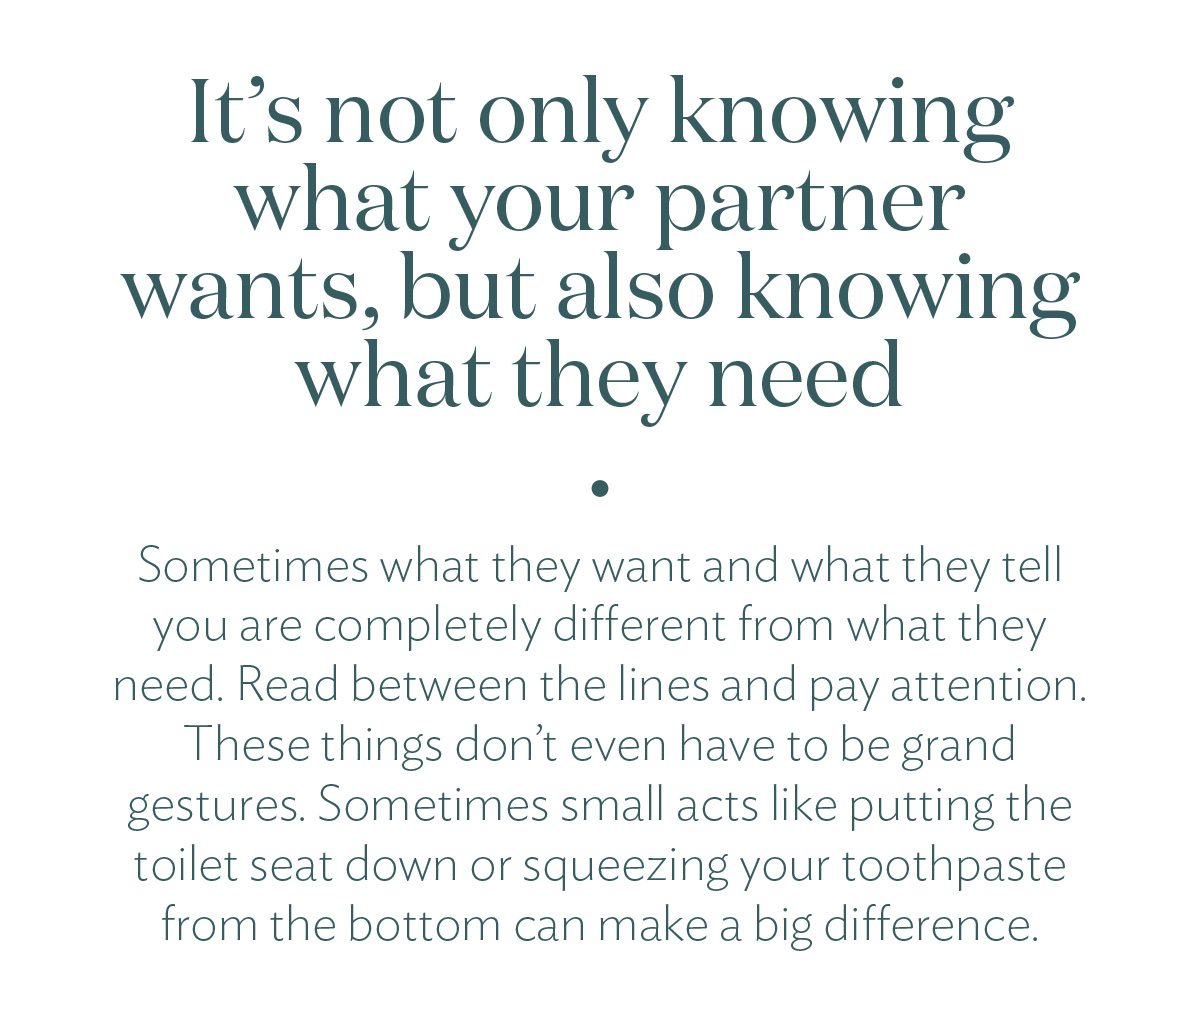 It's not only knowing what your partner wants, but also knowing what they need. Sometimes what they want and what they tell you are completely different from what they need. Read between the lines and pay attention. These things don’t even have to be grand gestures. Sometimes small acts like putting the toilet seat down or squeezing your toothpaste from the bottom can make a big difference.